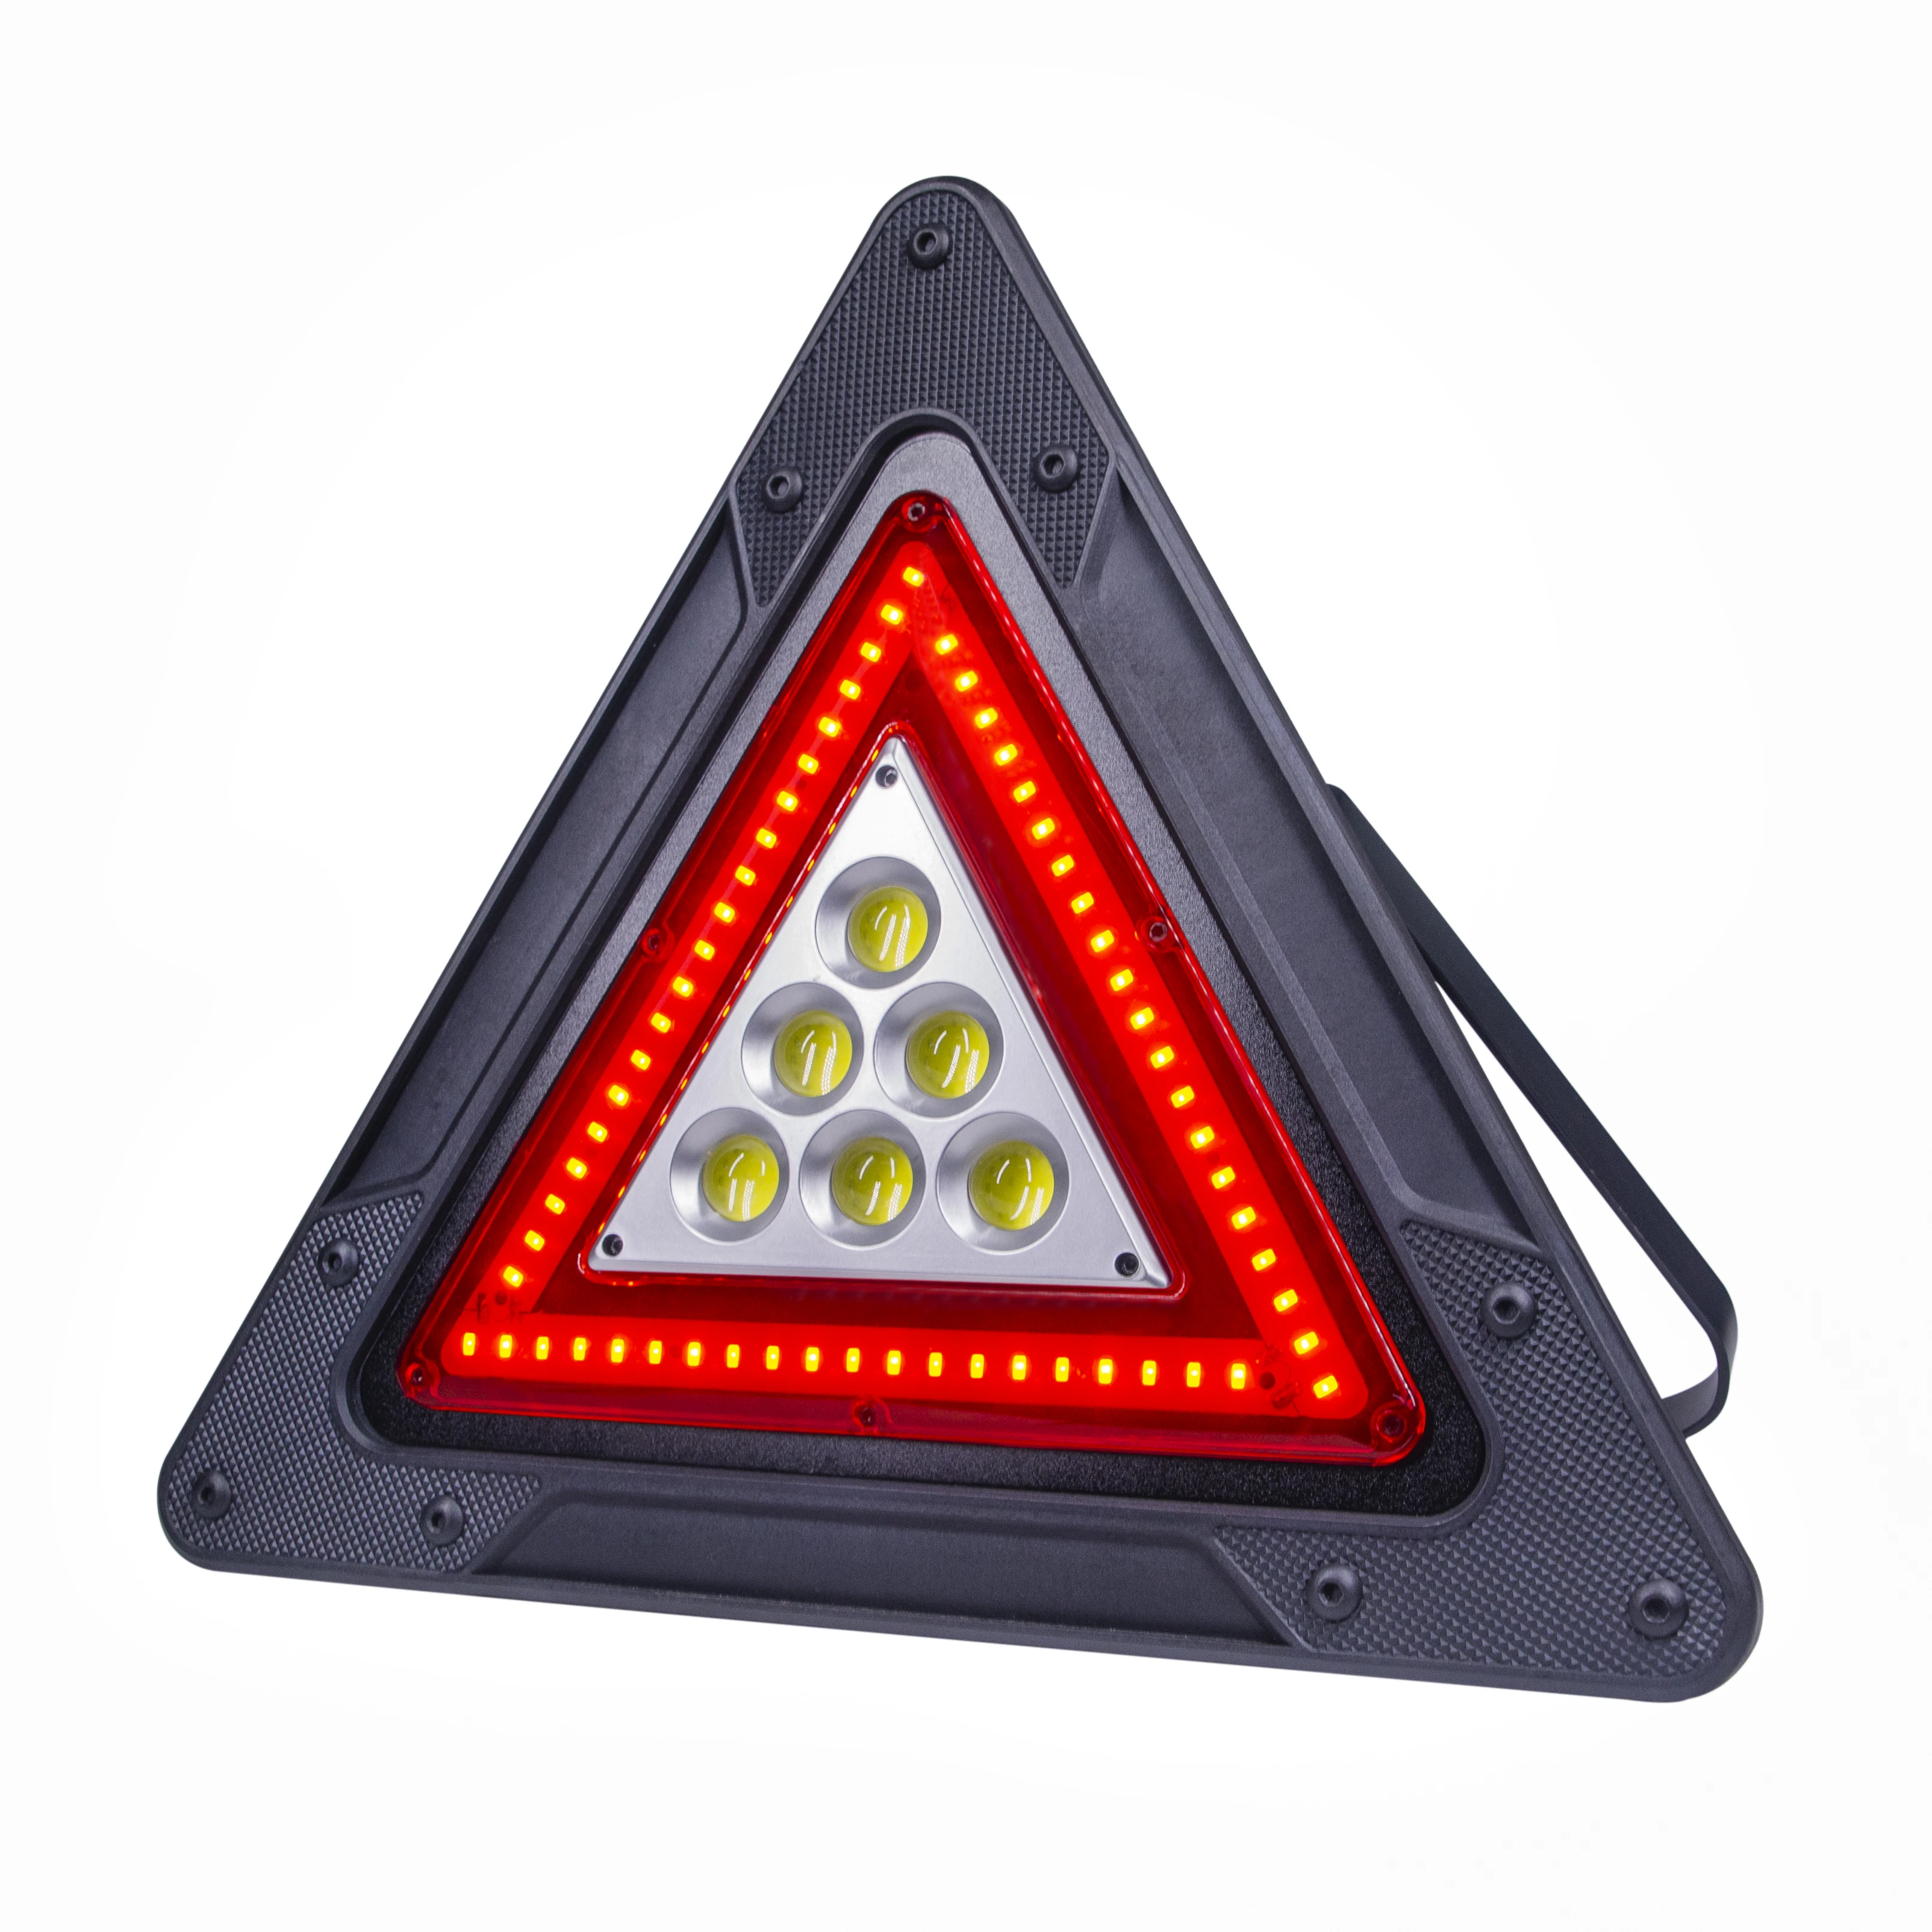 Super Bright 1500LM USB Rechargeable Lamp Large Triangle 5W COB 60SMD Led Warning Work Lights with Stand for Car Emergency